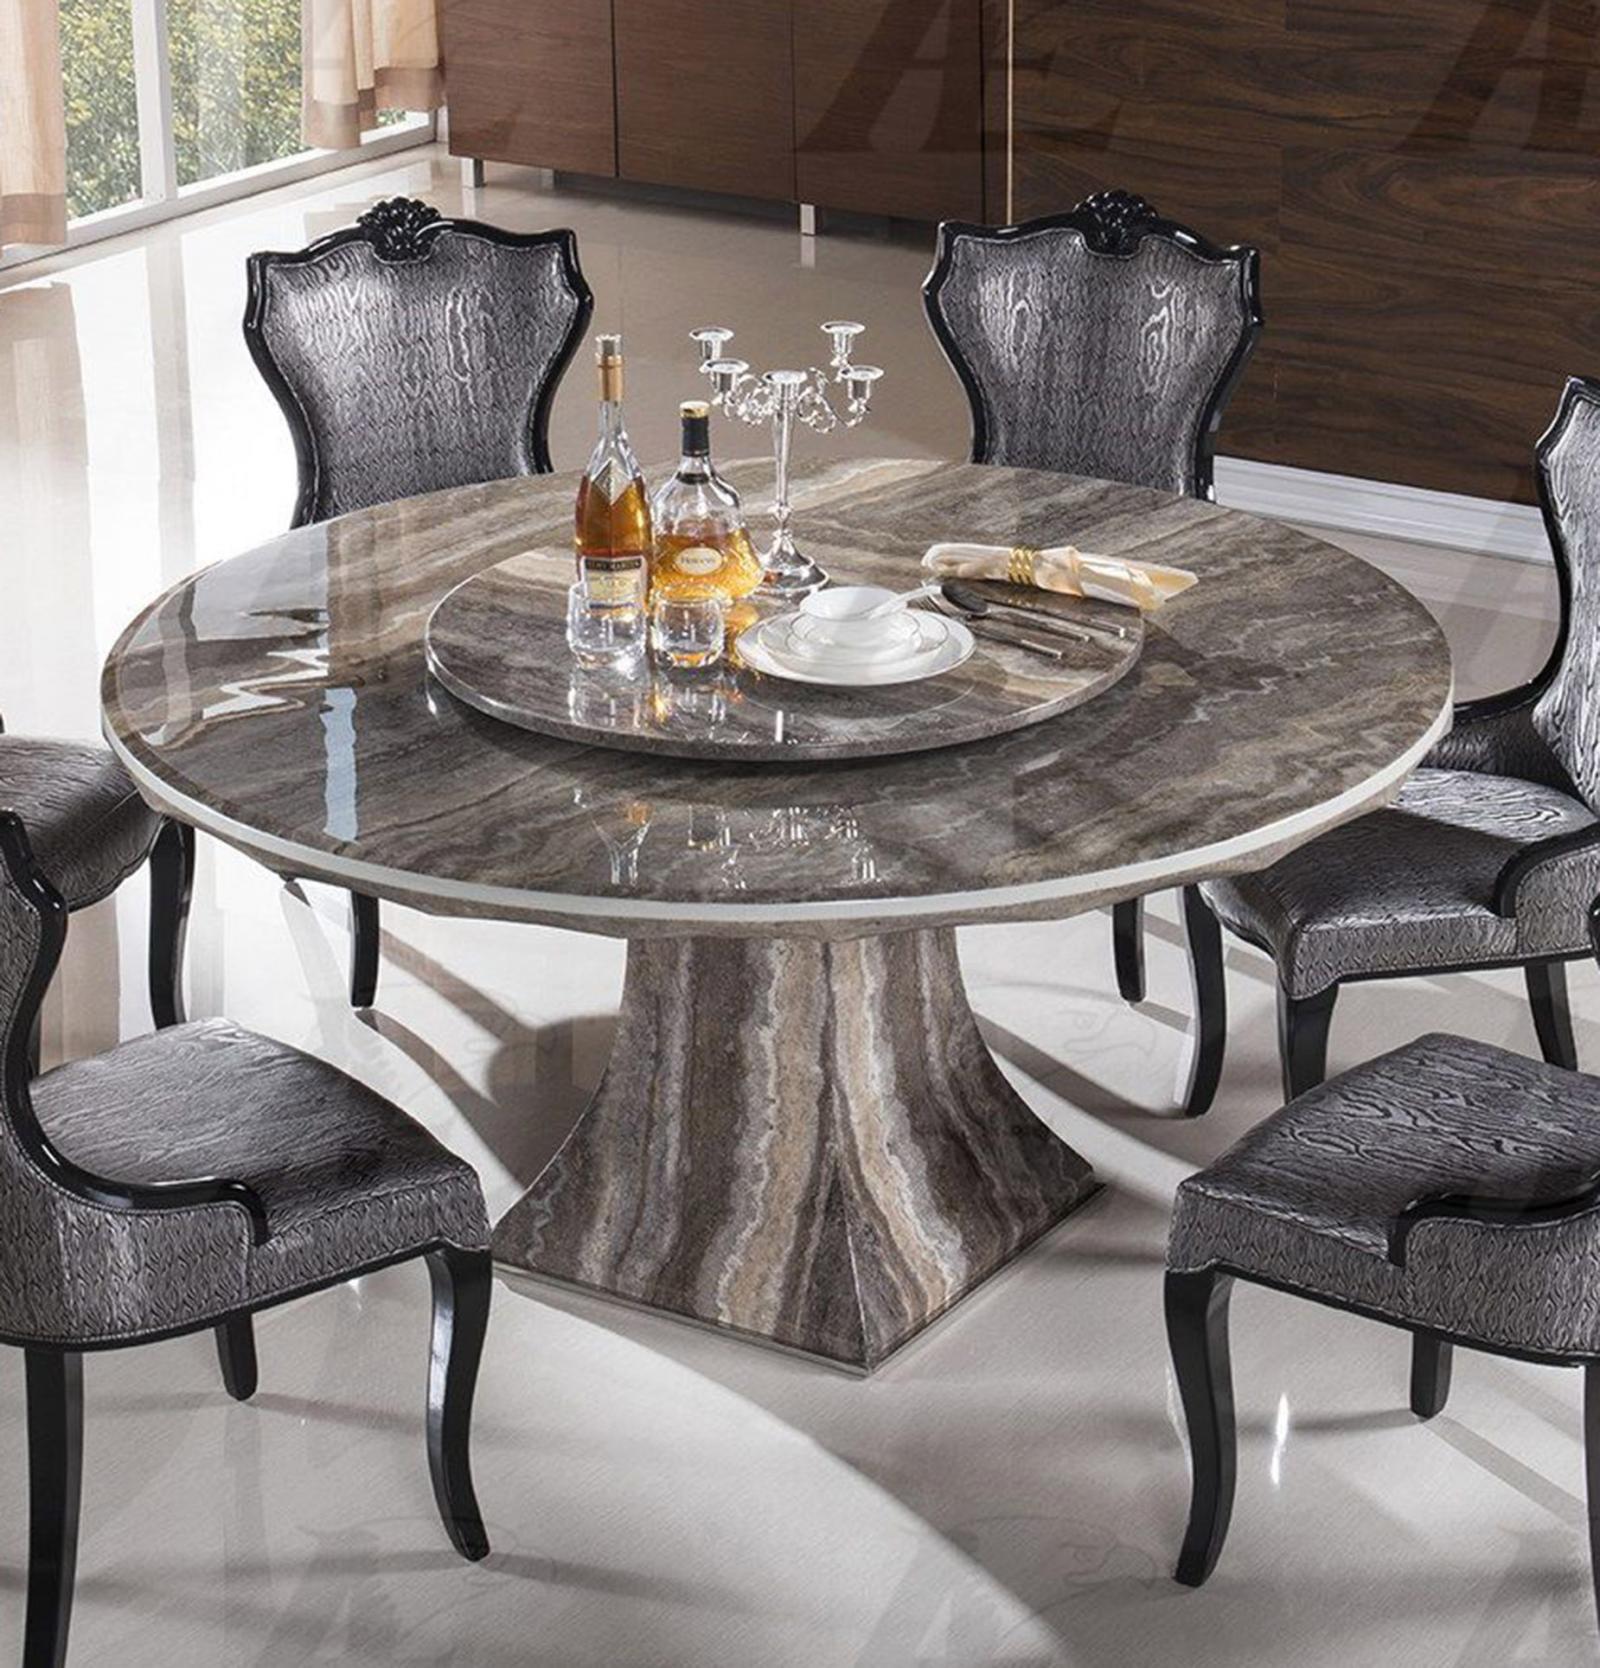 

    
Faux Marble Top Round Dining Room Set 5Pcs American Eagle DT-H36
